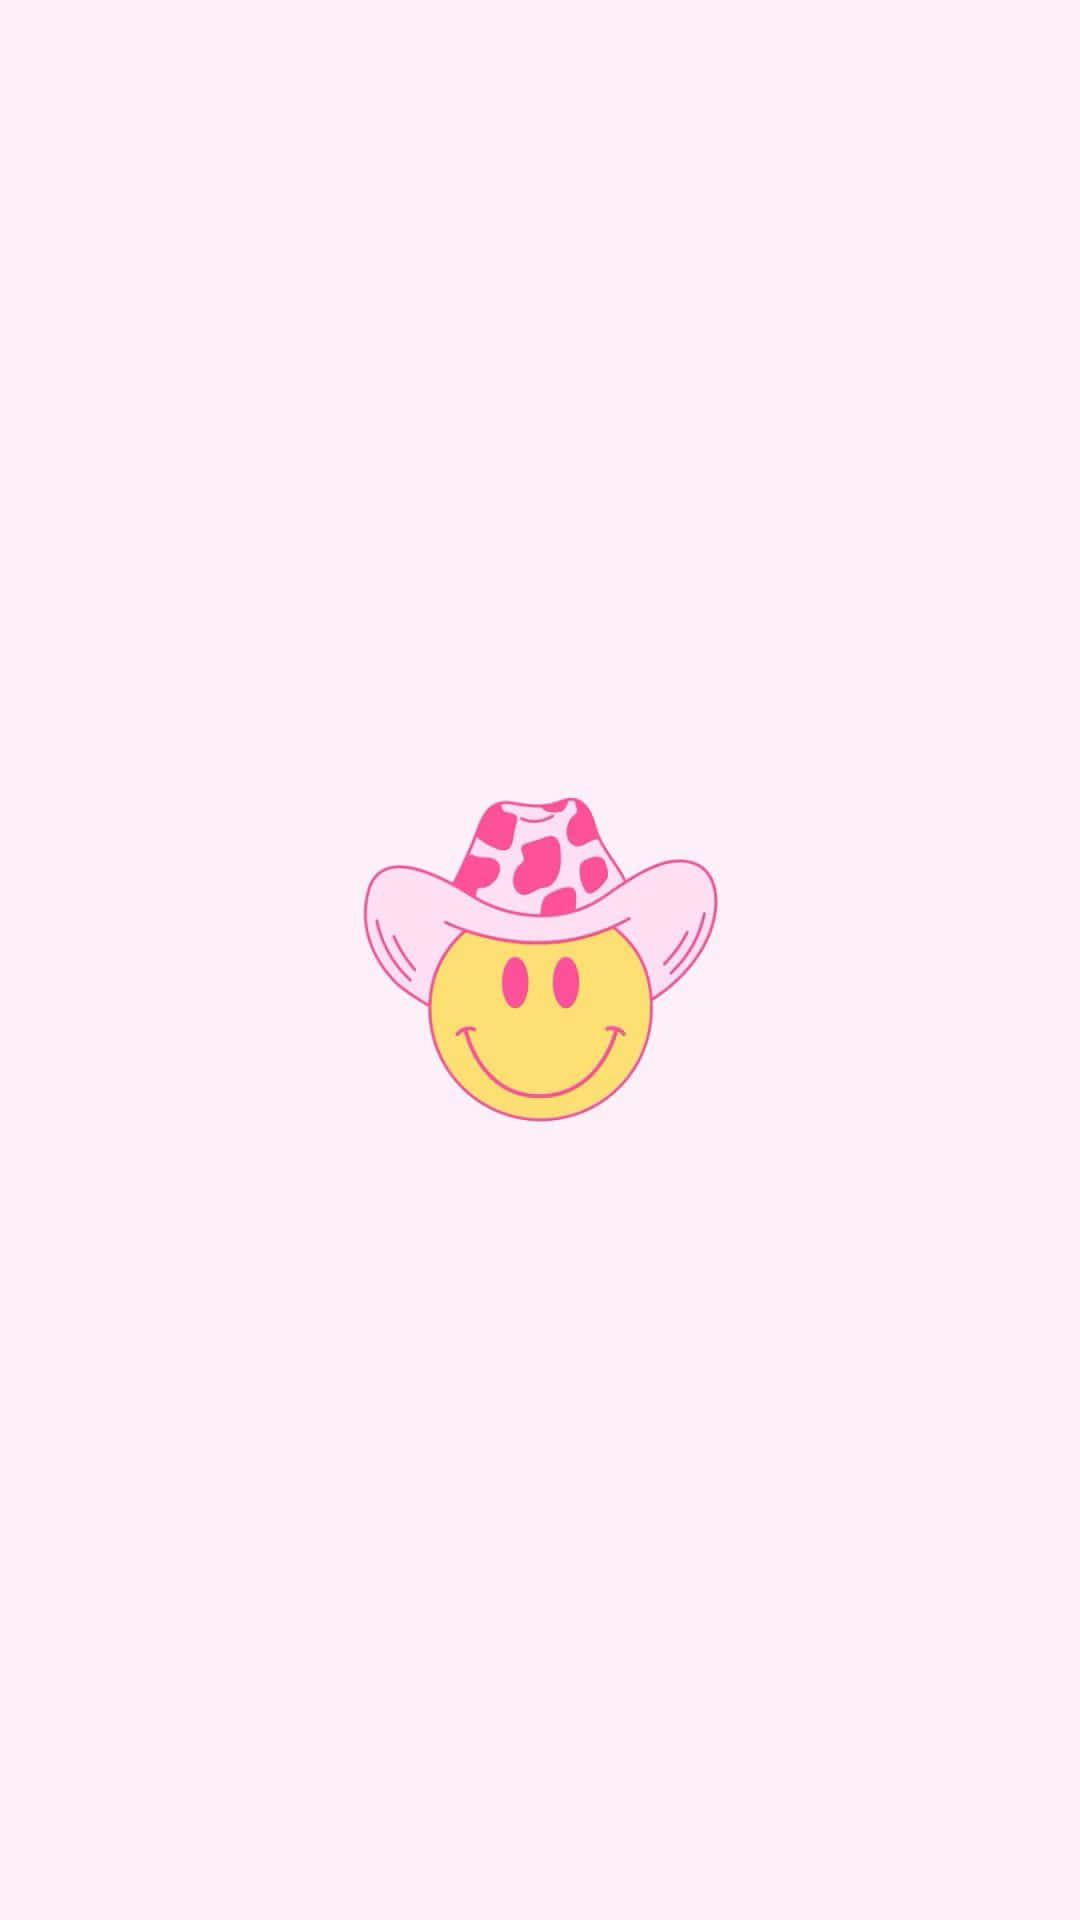 Disco Cowgirl Smiley Face Pink Background Wallpaper